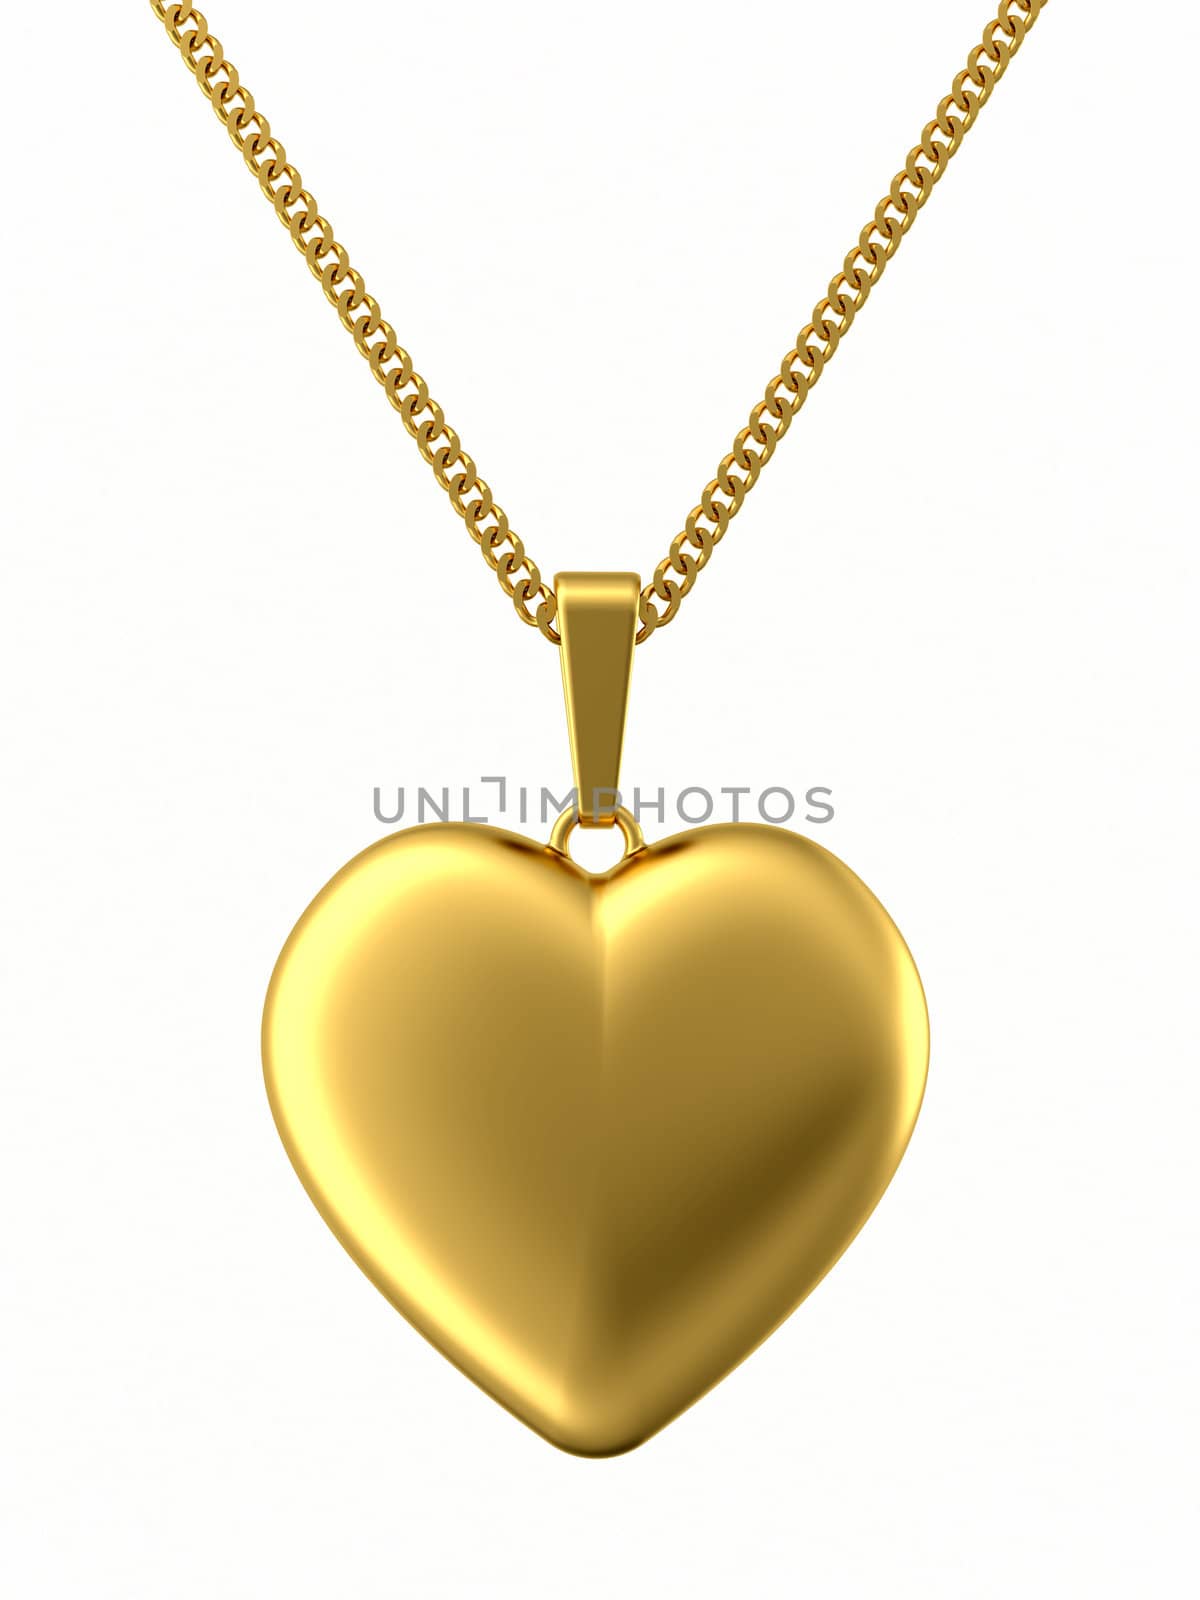 Golden pendant in shape of heart on chain isolated on white. High resolution 3D image